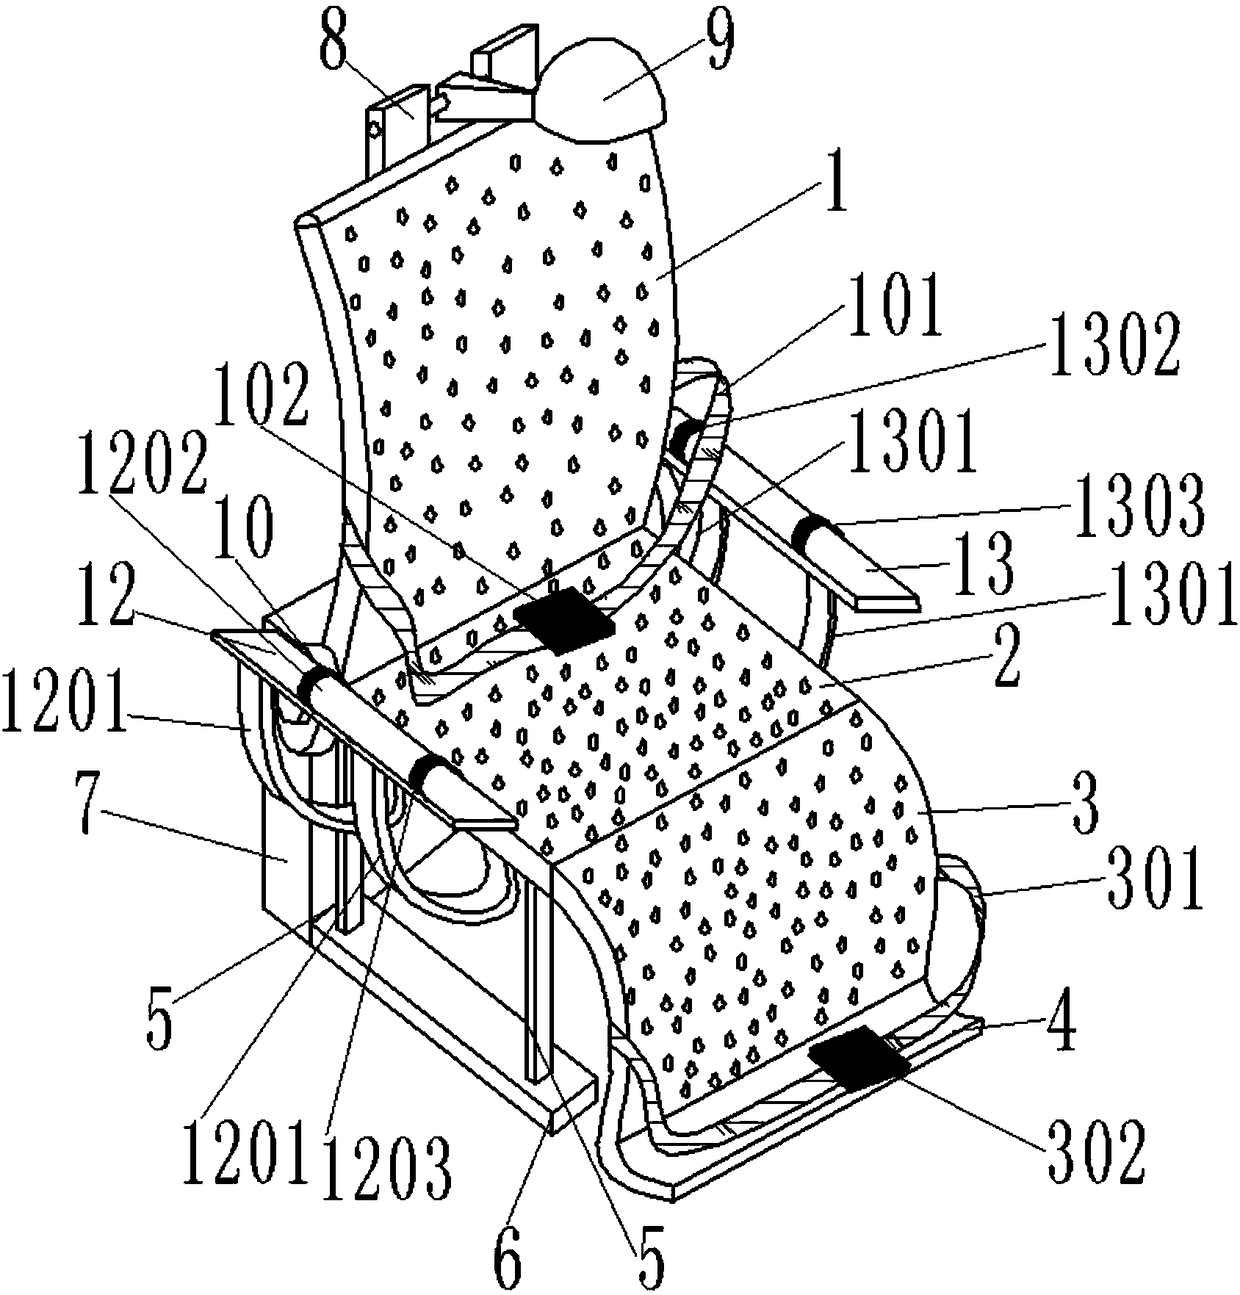 Psychopath binding chair for traditional Chinese medicine fumigation information collection